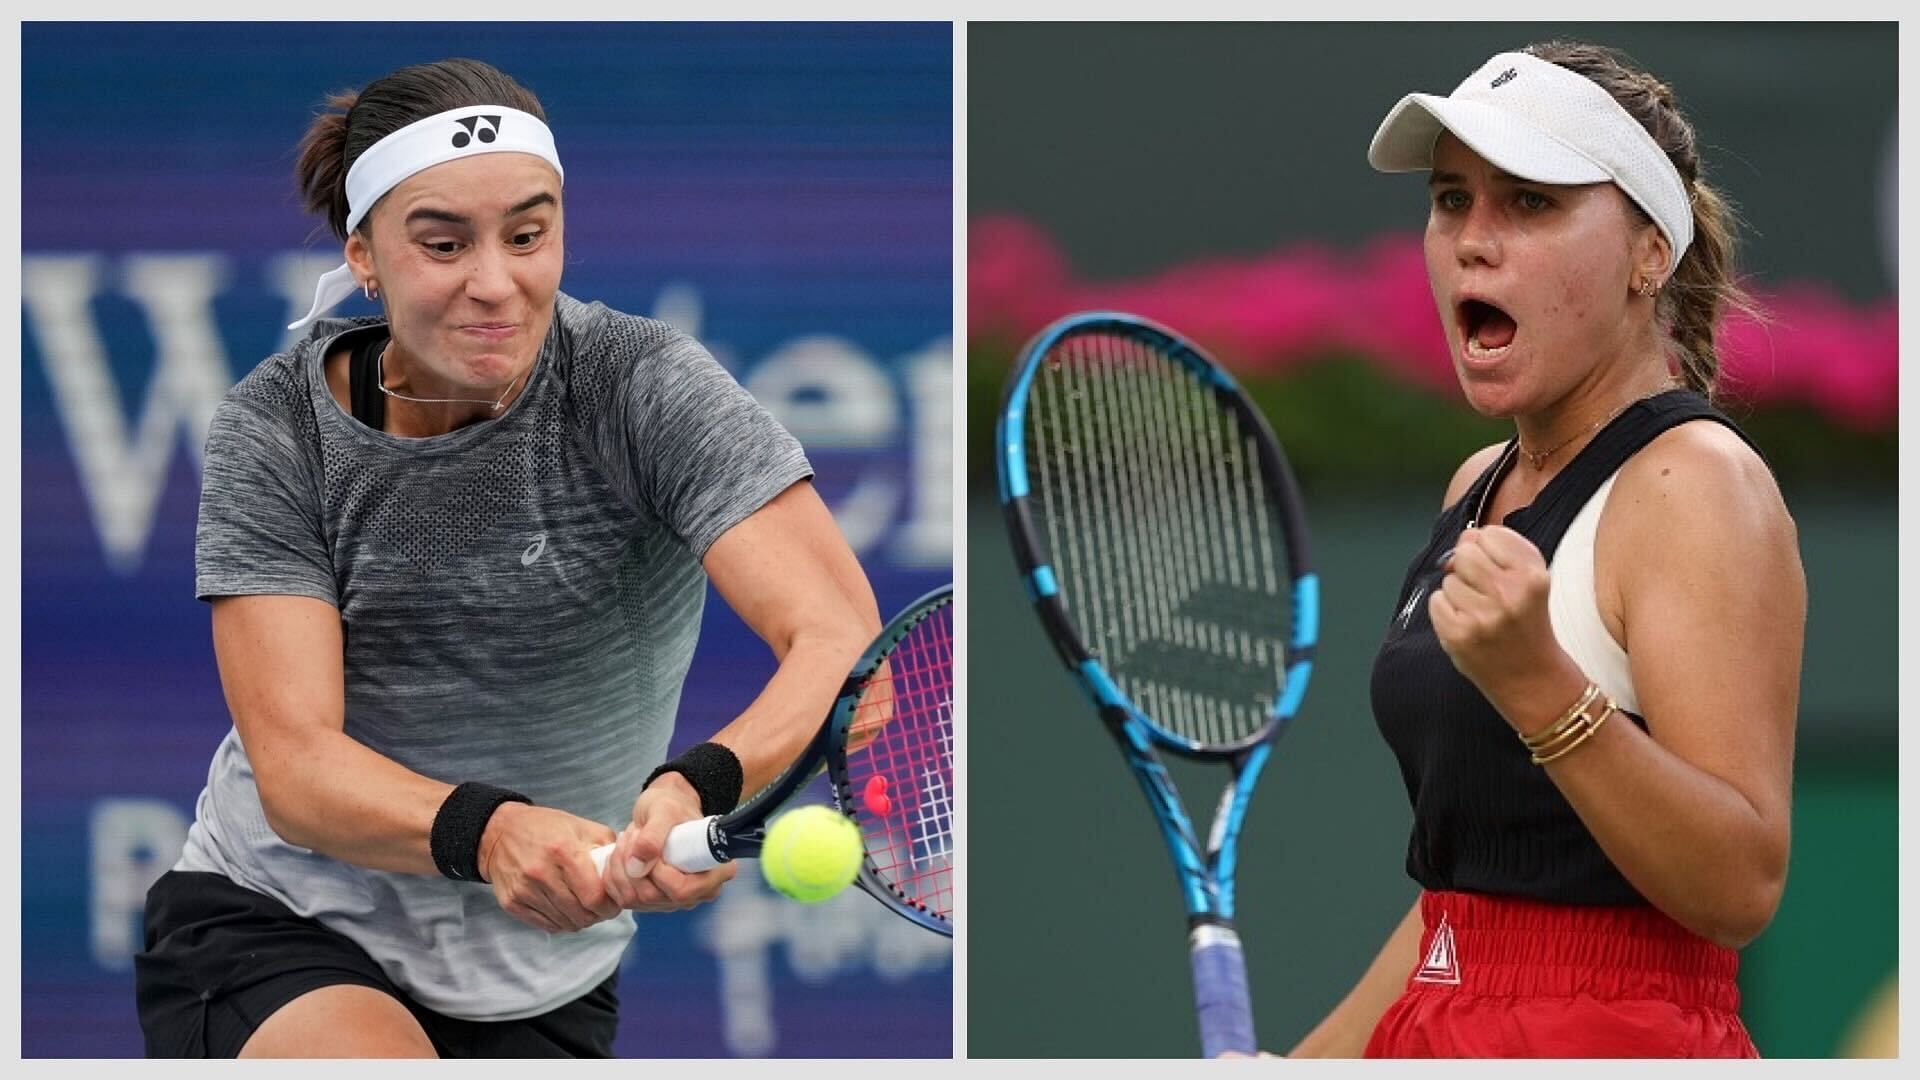 Anhelina Kalinina vs Sofia Kenin is one of the second round matches at the 2023 Guadalajara Open.